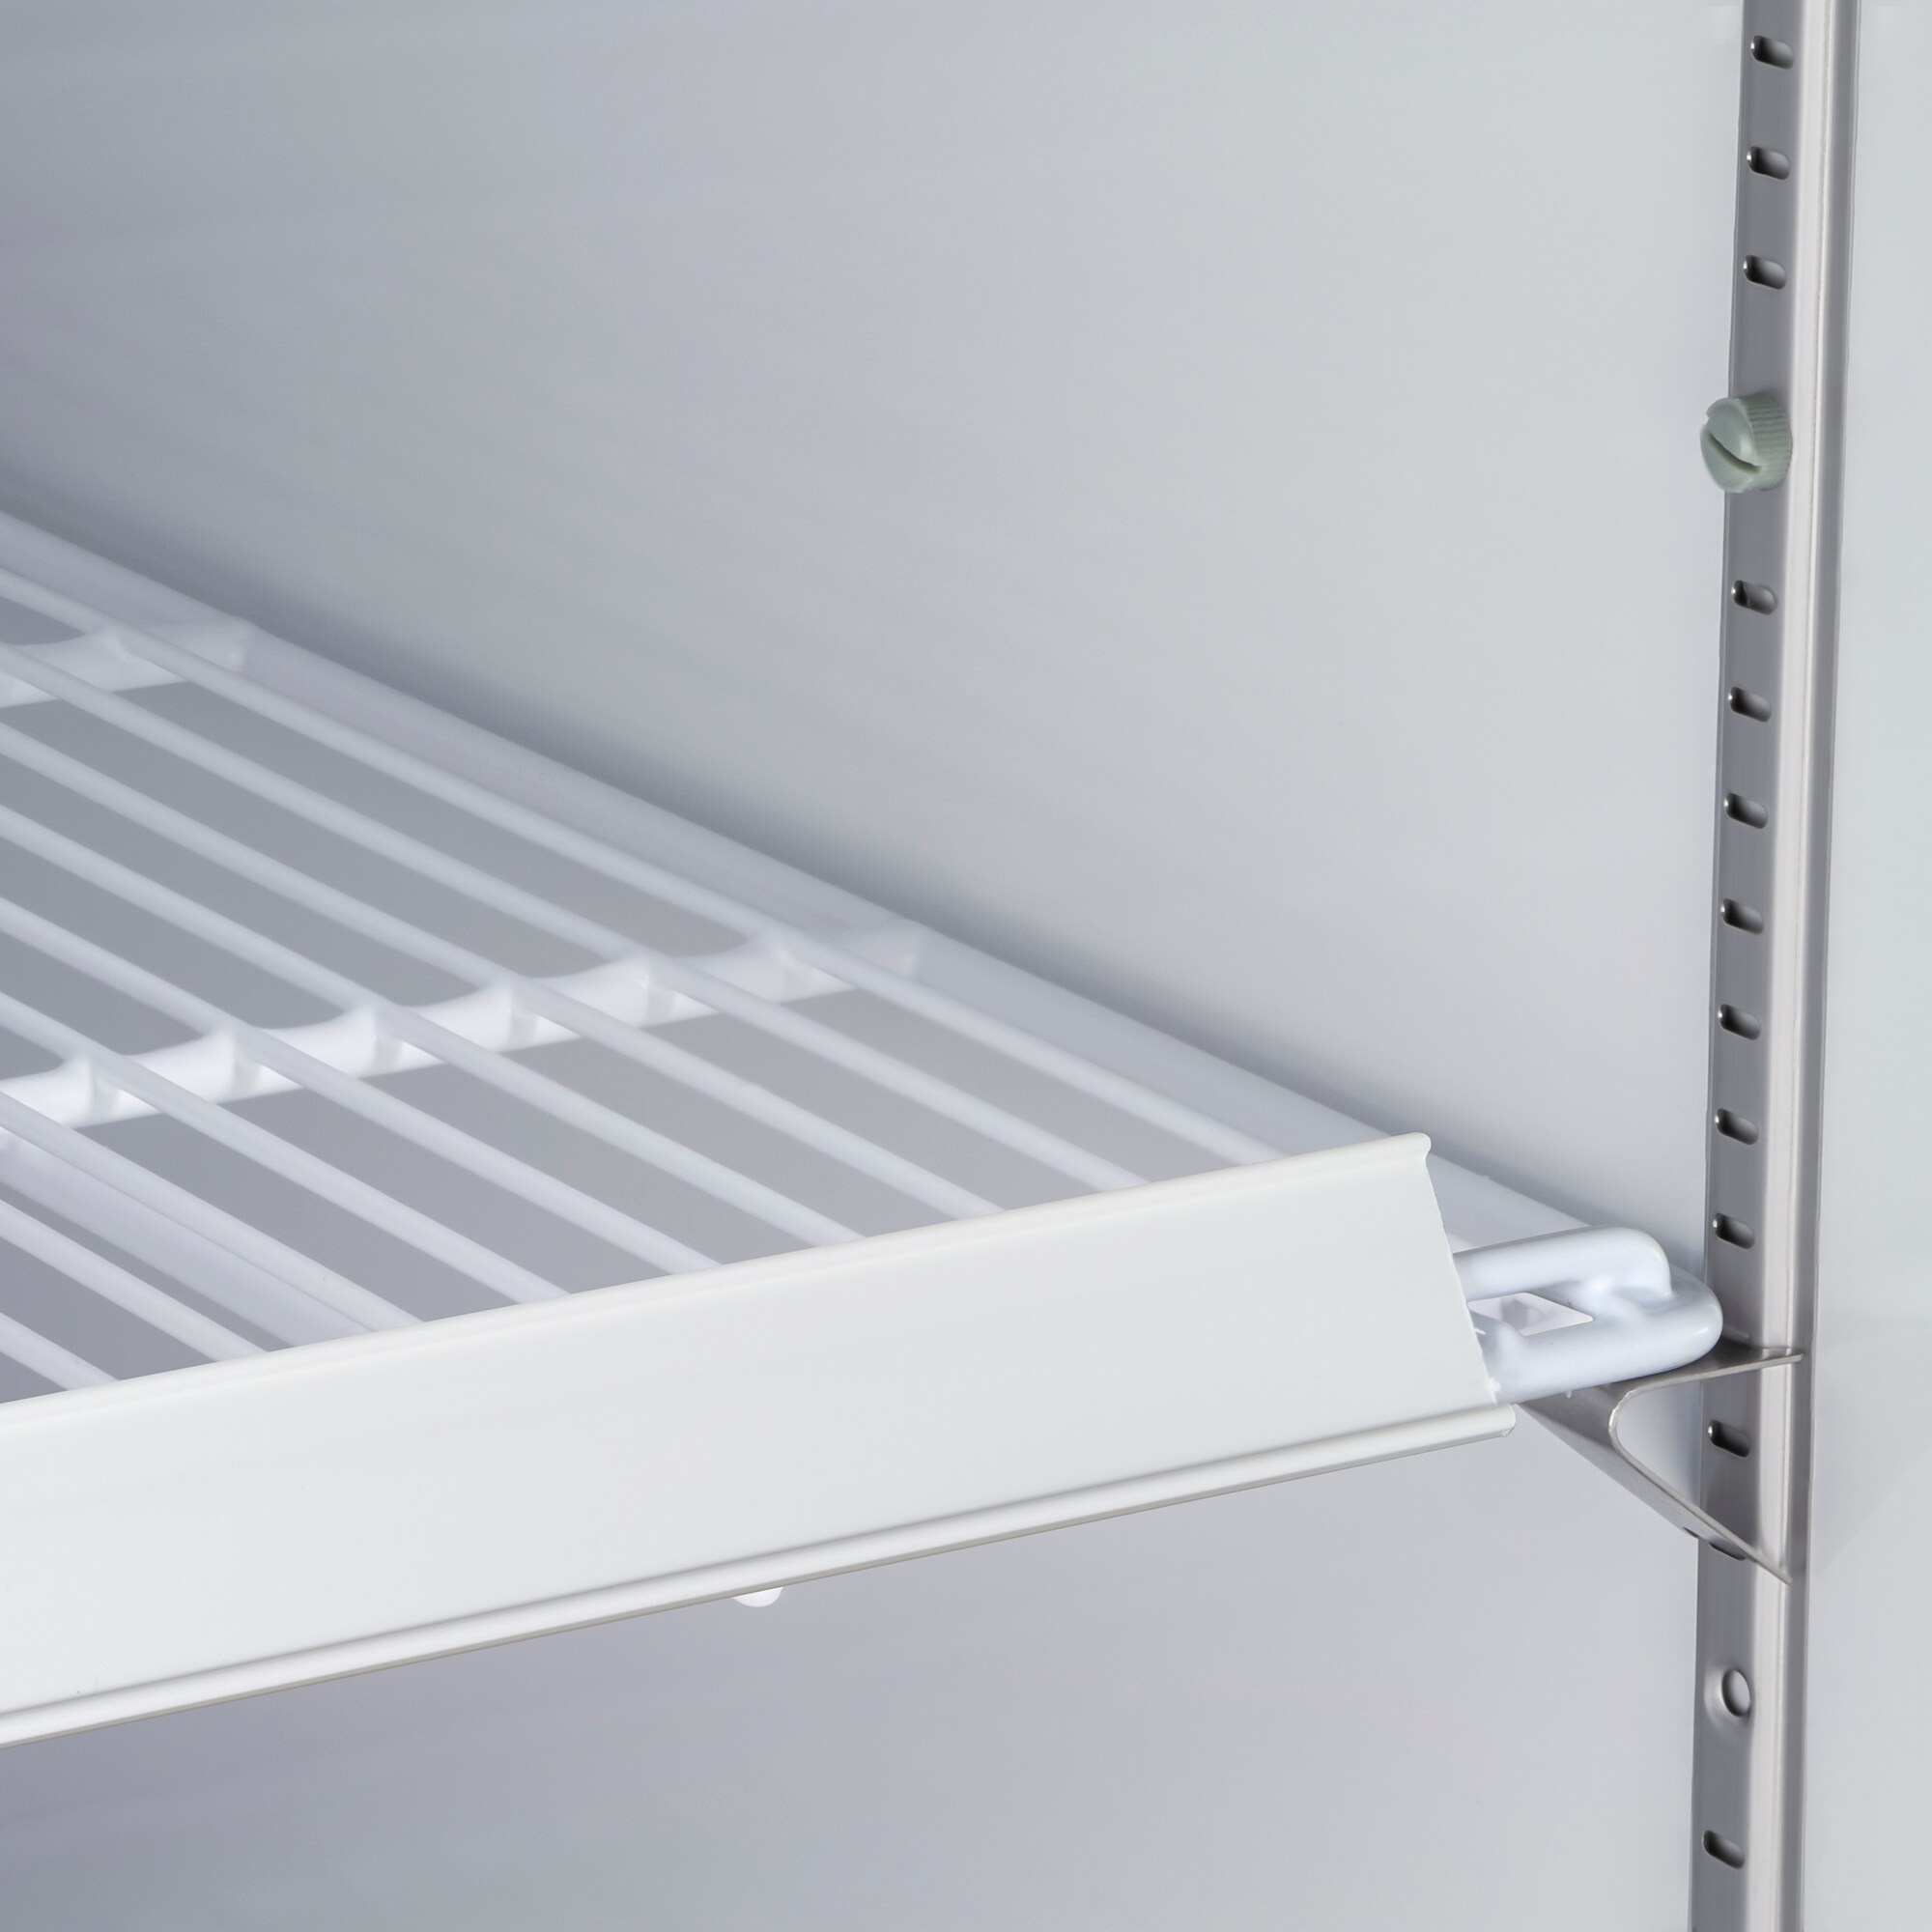 Do You Need a Garage Chest Freezer? Shop Home Appliance, Kitchen  Appliances, Electrical Contracting in Chillicothe, OH 45601, 45690, 45640